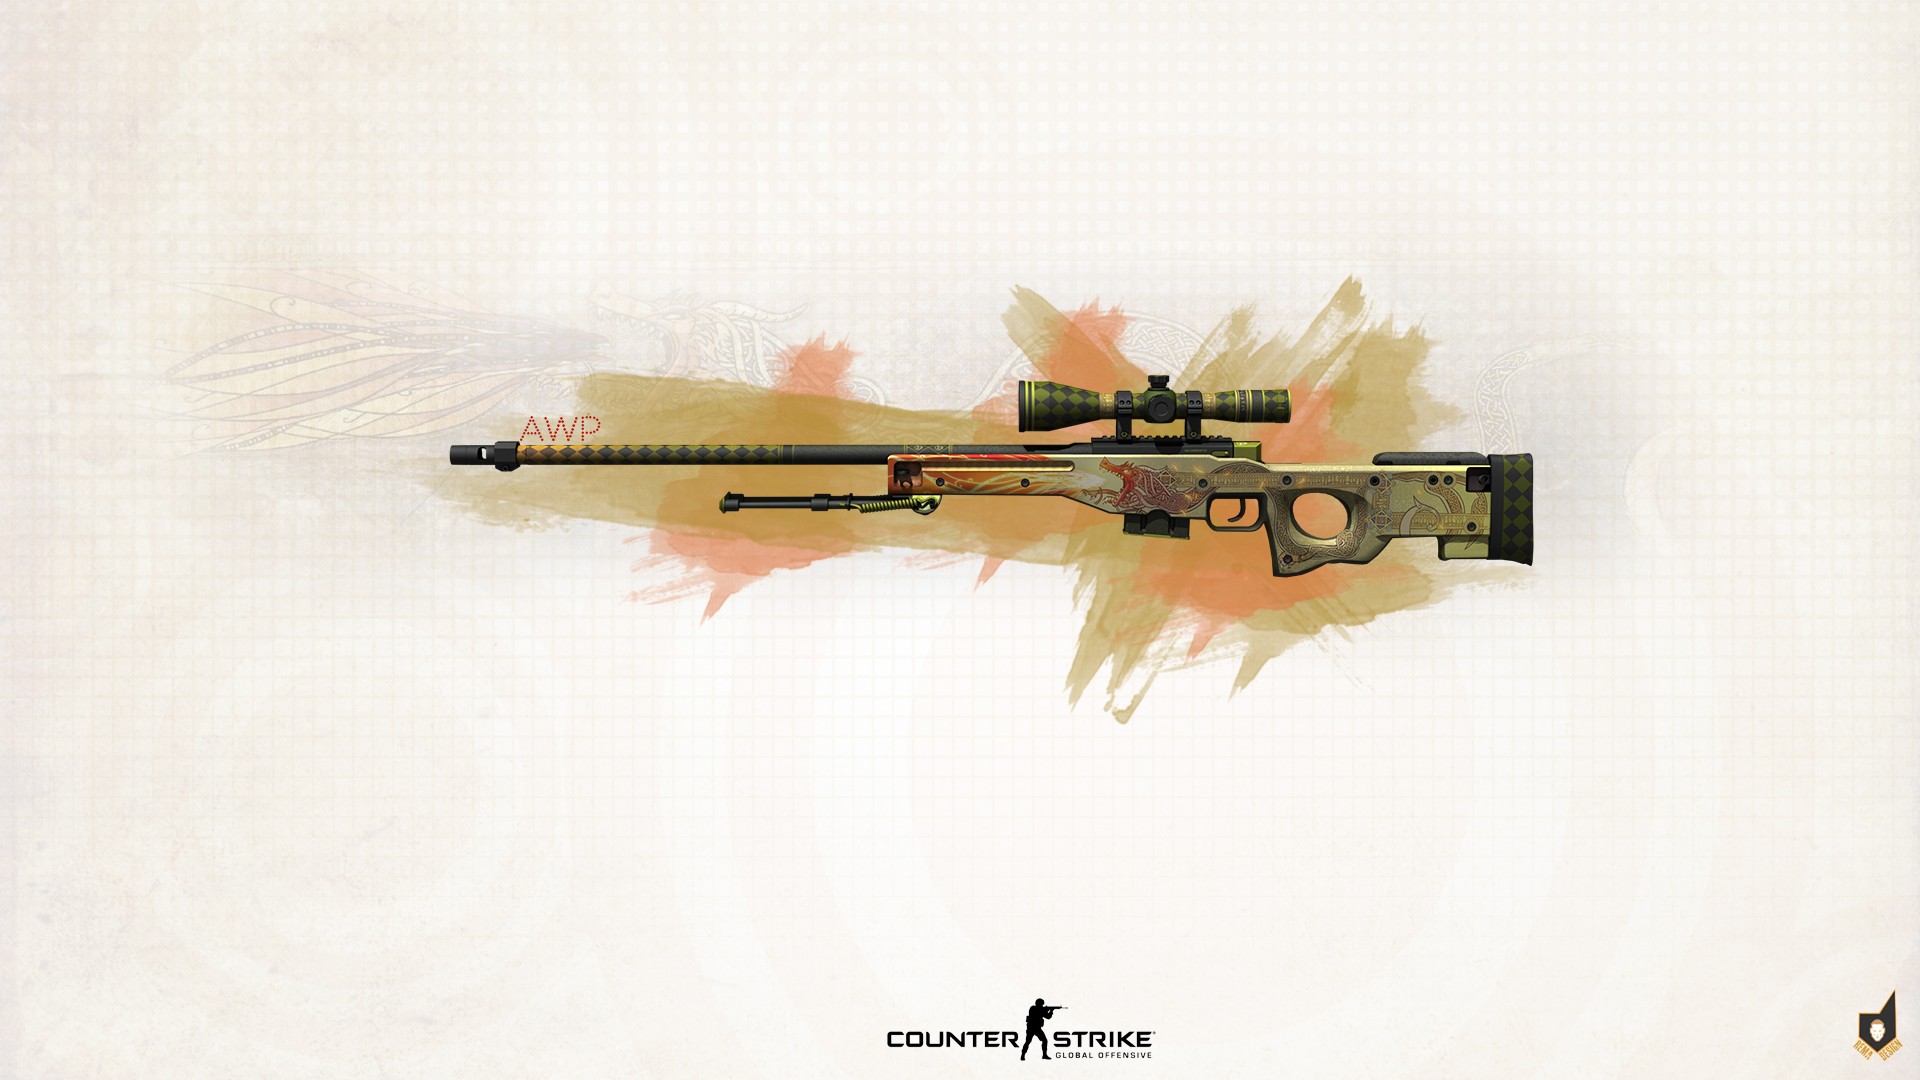 General 1920x1080 Counter-Strike Counter-Strike: Global Offensive sniper rifle Accuracy International AWP weapon PC gaming white background simple background rifles